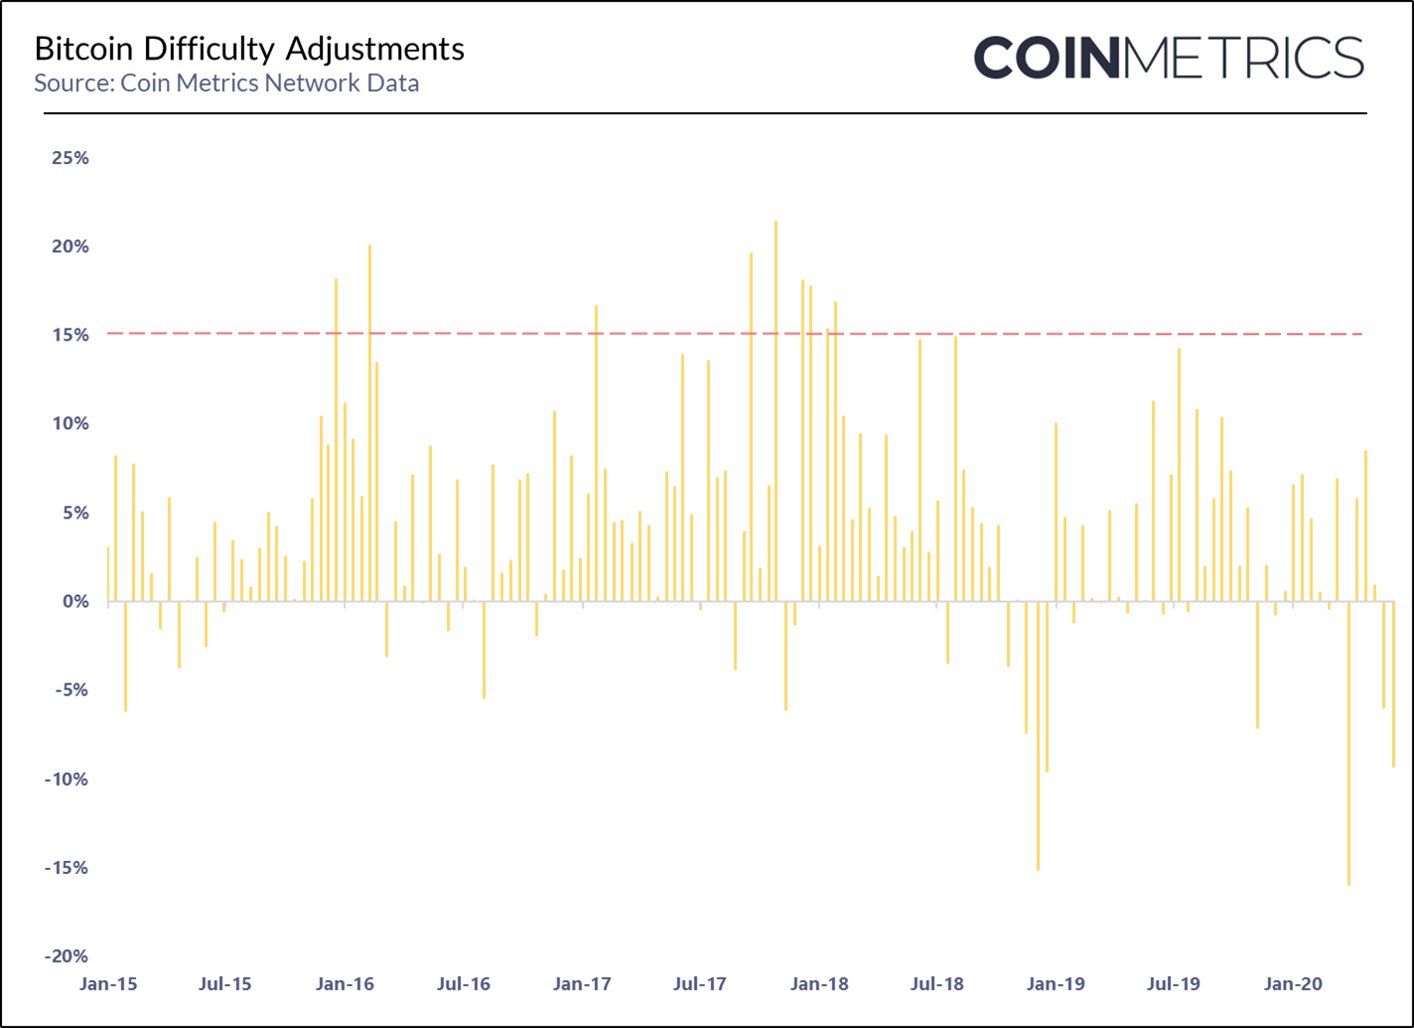 15% Upward Difficulty Adjustment for Bitcoin